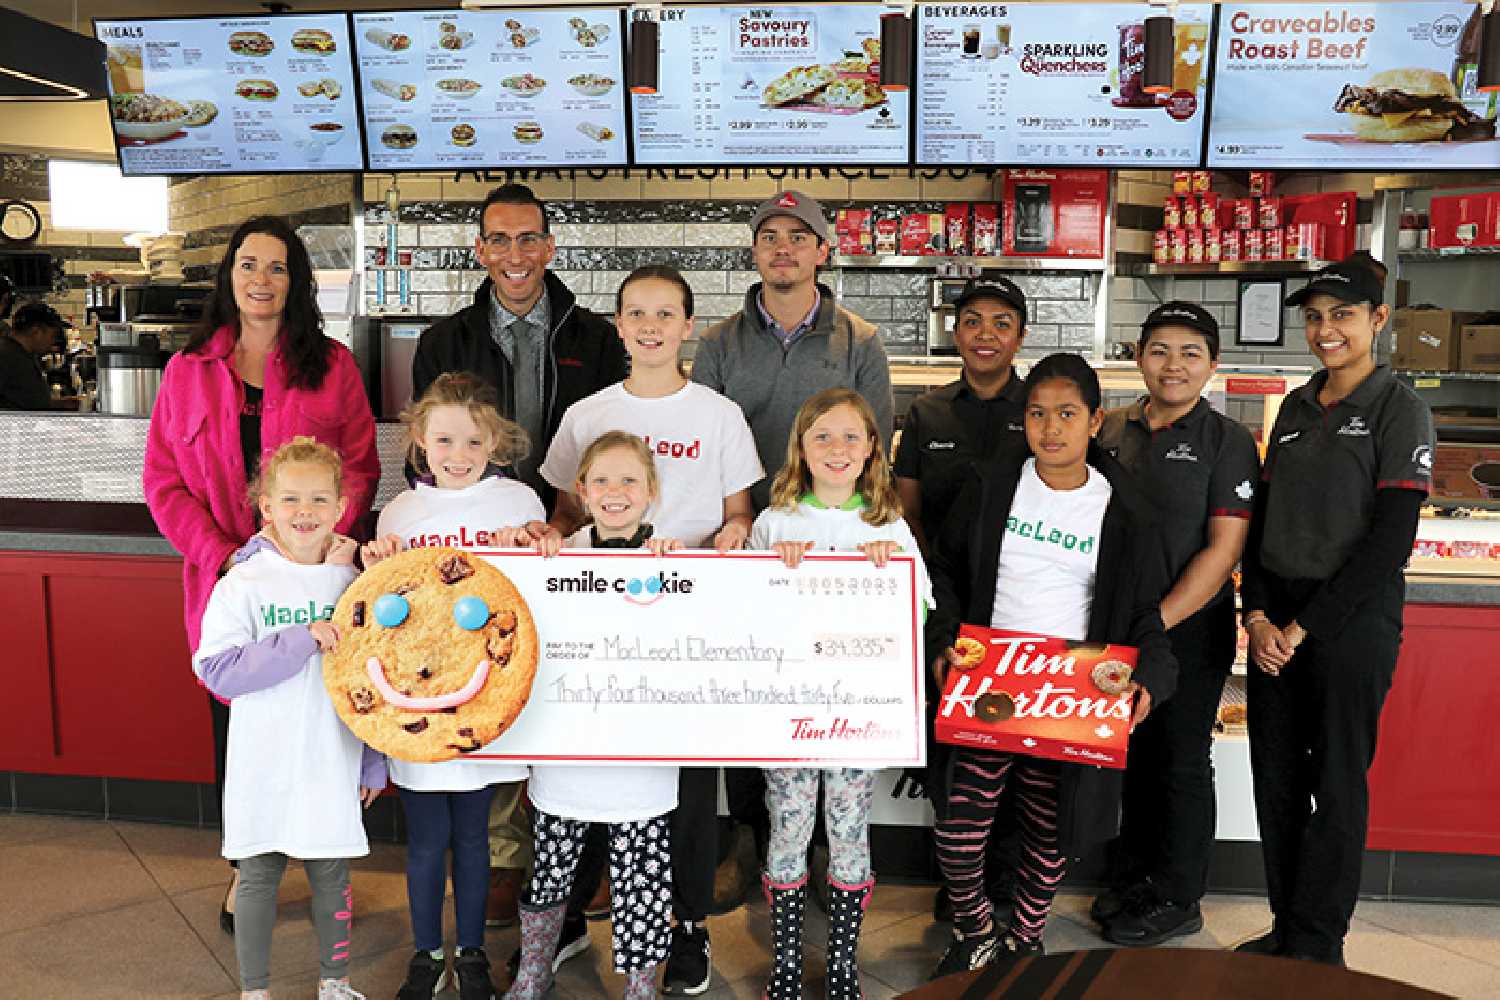 Principal Tammy Cole and students from MacLeod Penny Jeannot, Billee Kosier, Jessa Thorn, Hadley Miller, Anika Thorn and Casey  Caliwag thanked Moosomin Tim Hortons for their donation of $34,335 from Smile Cookie Week, which will go towards supporting the school’s playground project. <b>From left are,</b> Tammy Cole, Westman Tim Horton’s Owner Greg Crisanti, Tanner Bell district manager, Cherrie Caliwag store manager at Moosomin Tim Hortons, Nikki Romero and Jaspreet Kaur of Moosomin Tim Hortons.